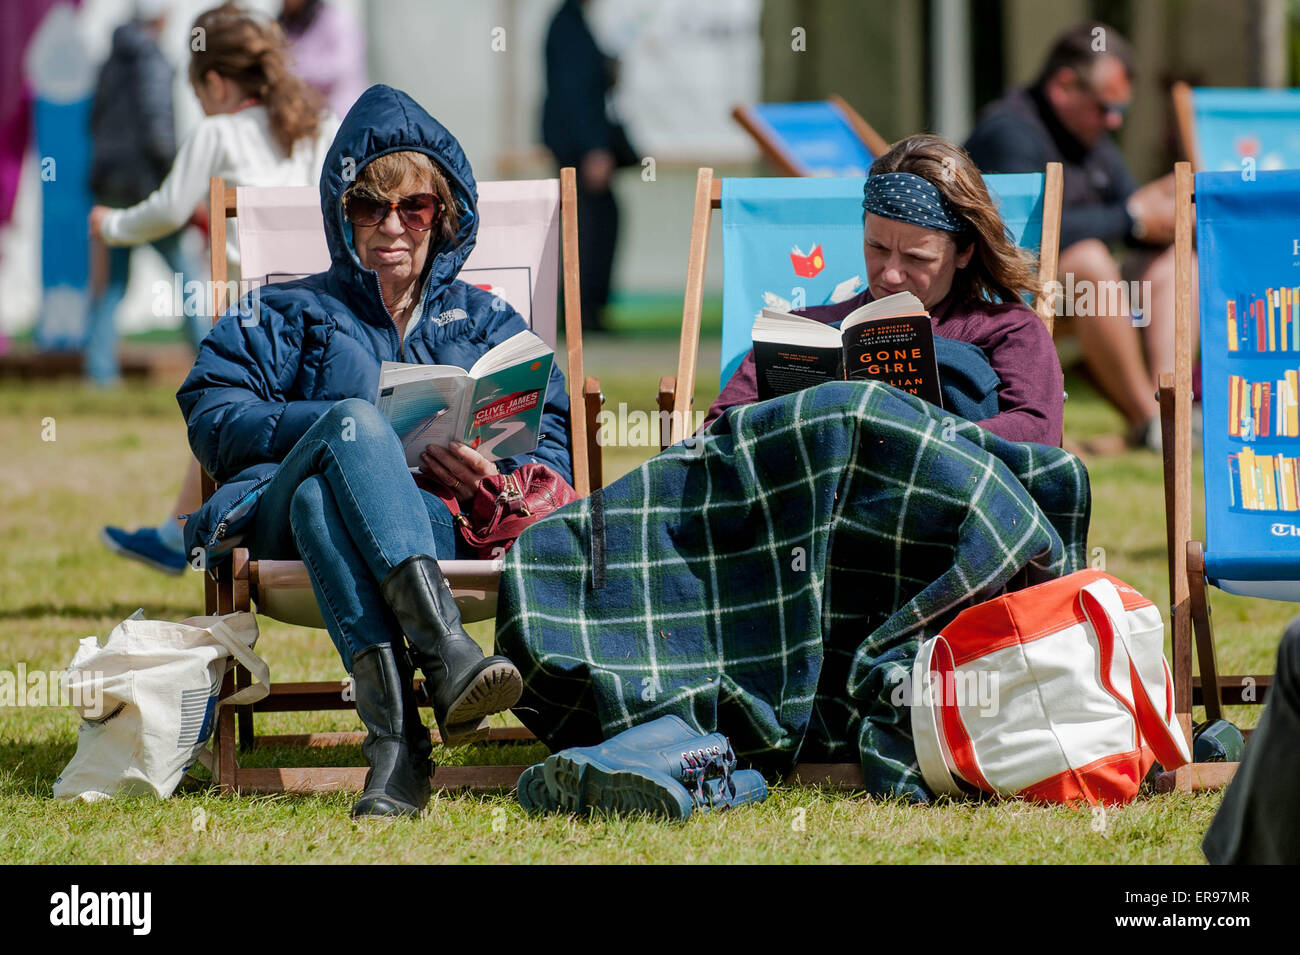 Hay on Wye, UK. Thursday 28 May 2015  Pictured: People wrap up warm to read books at the Hay festival Re: The 2015 Hay Festival takes place in Hay on Wye, Powys, Wales Stock Photo